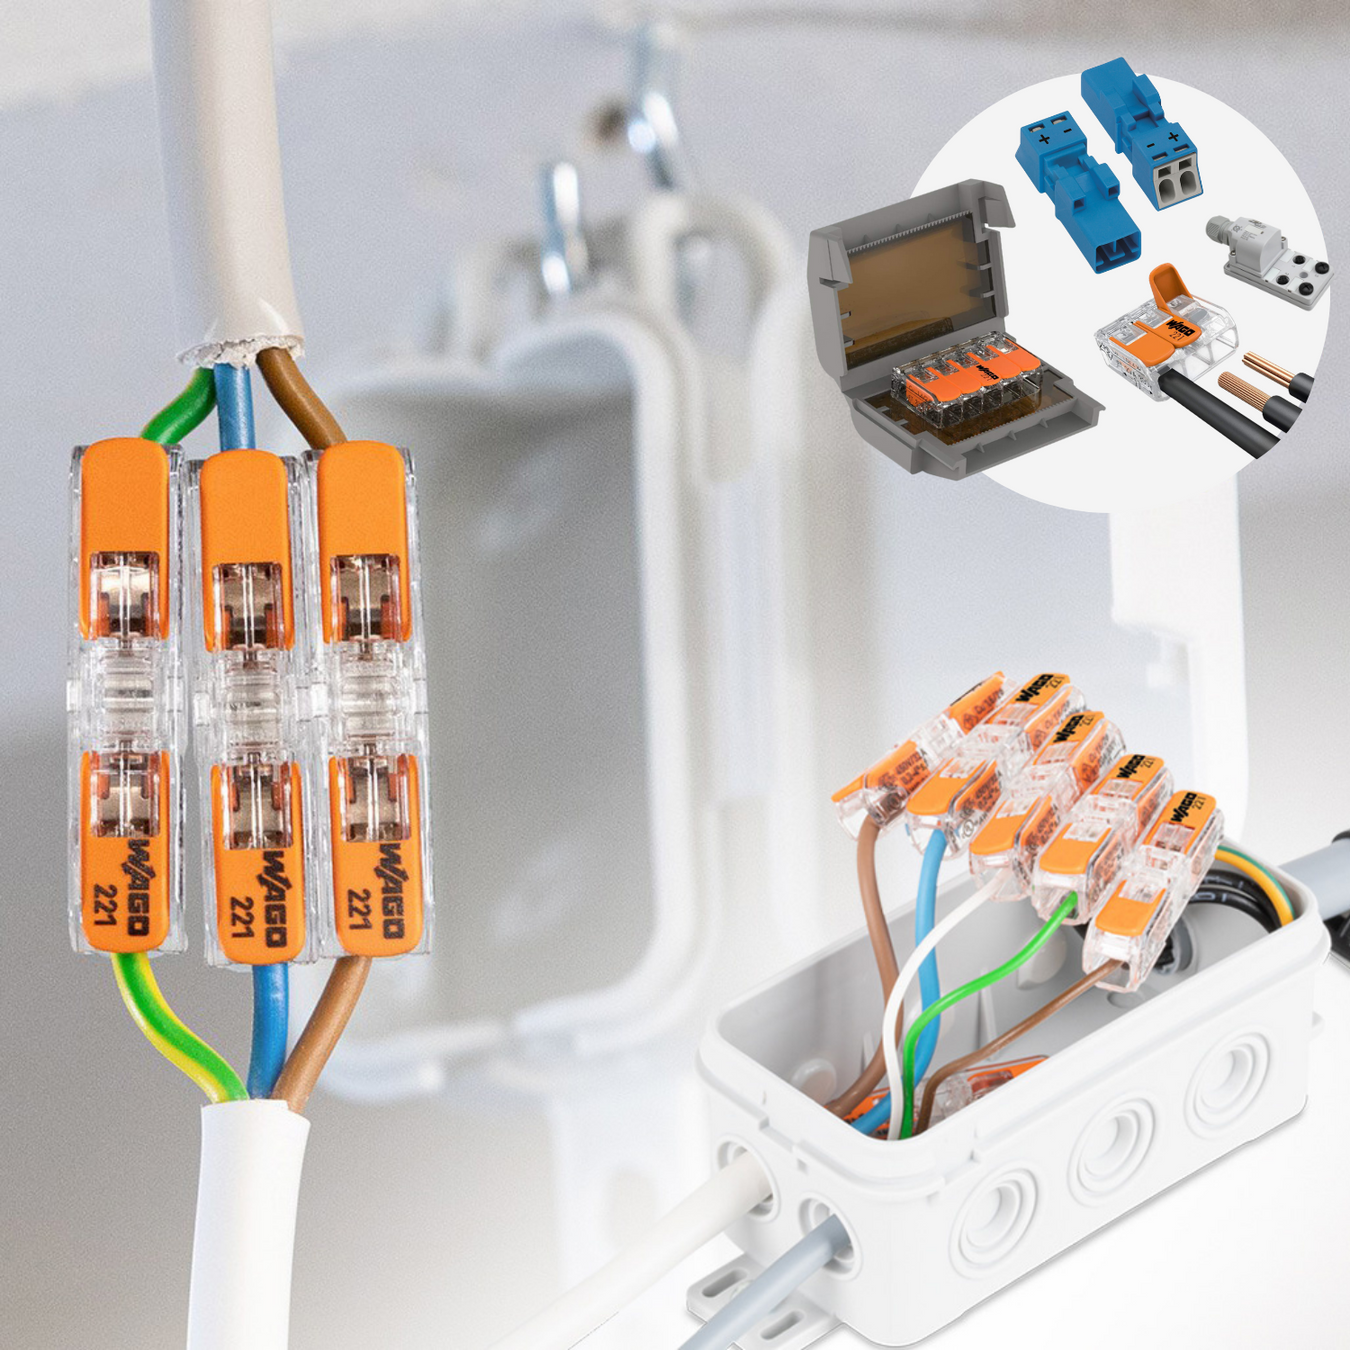 Power Distribution using Wago Connectors for LED Strip Lights